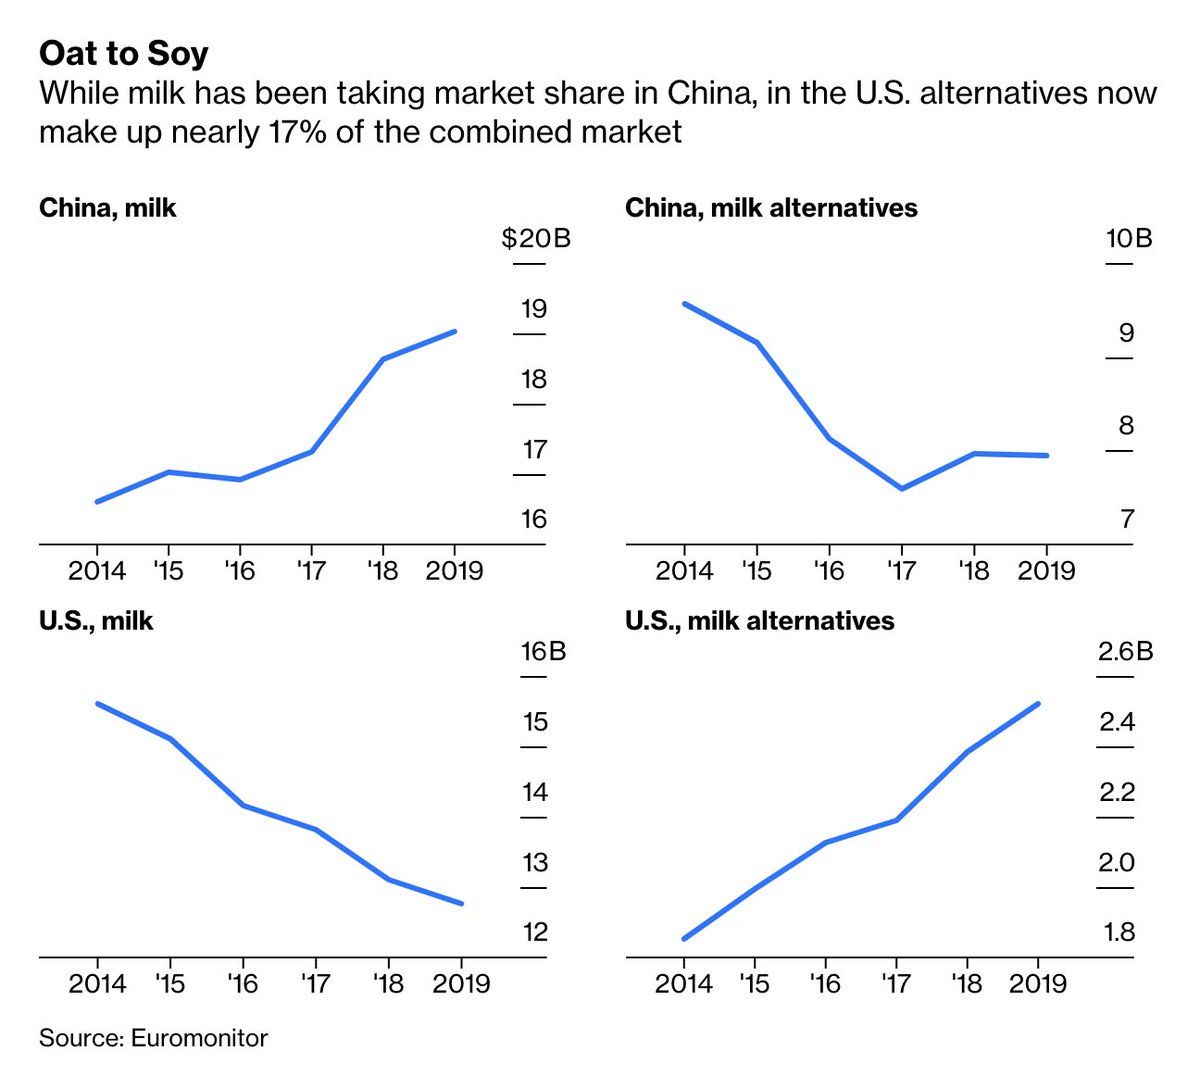 In China, plant milks have about a third of the combined market for milk and its alternatives, but it’s declining.In the U.S., the plant-based share is rising fast to nearly 17% of the combined market  http://bloom.bg/2FL3DJ7 